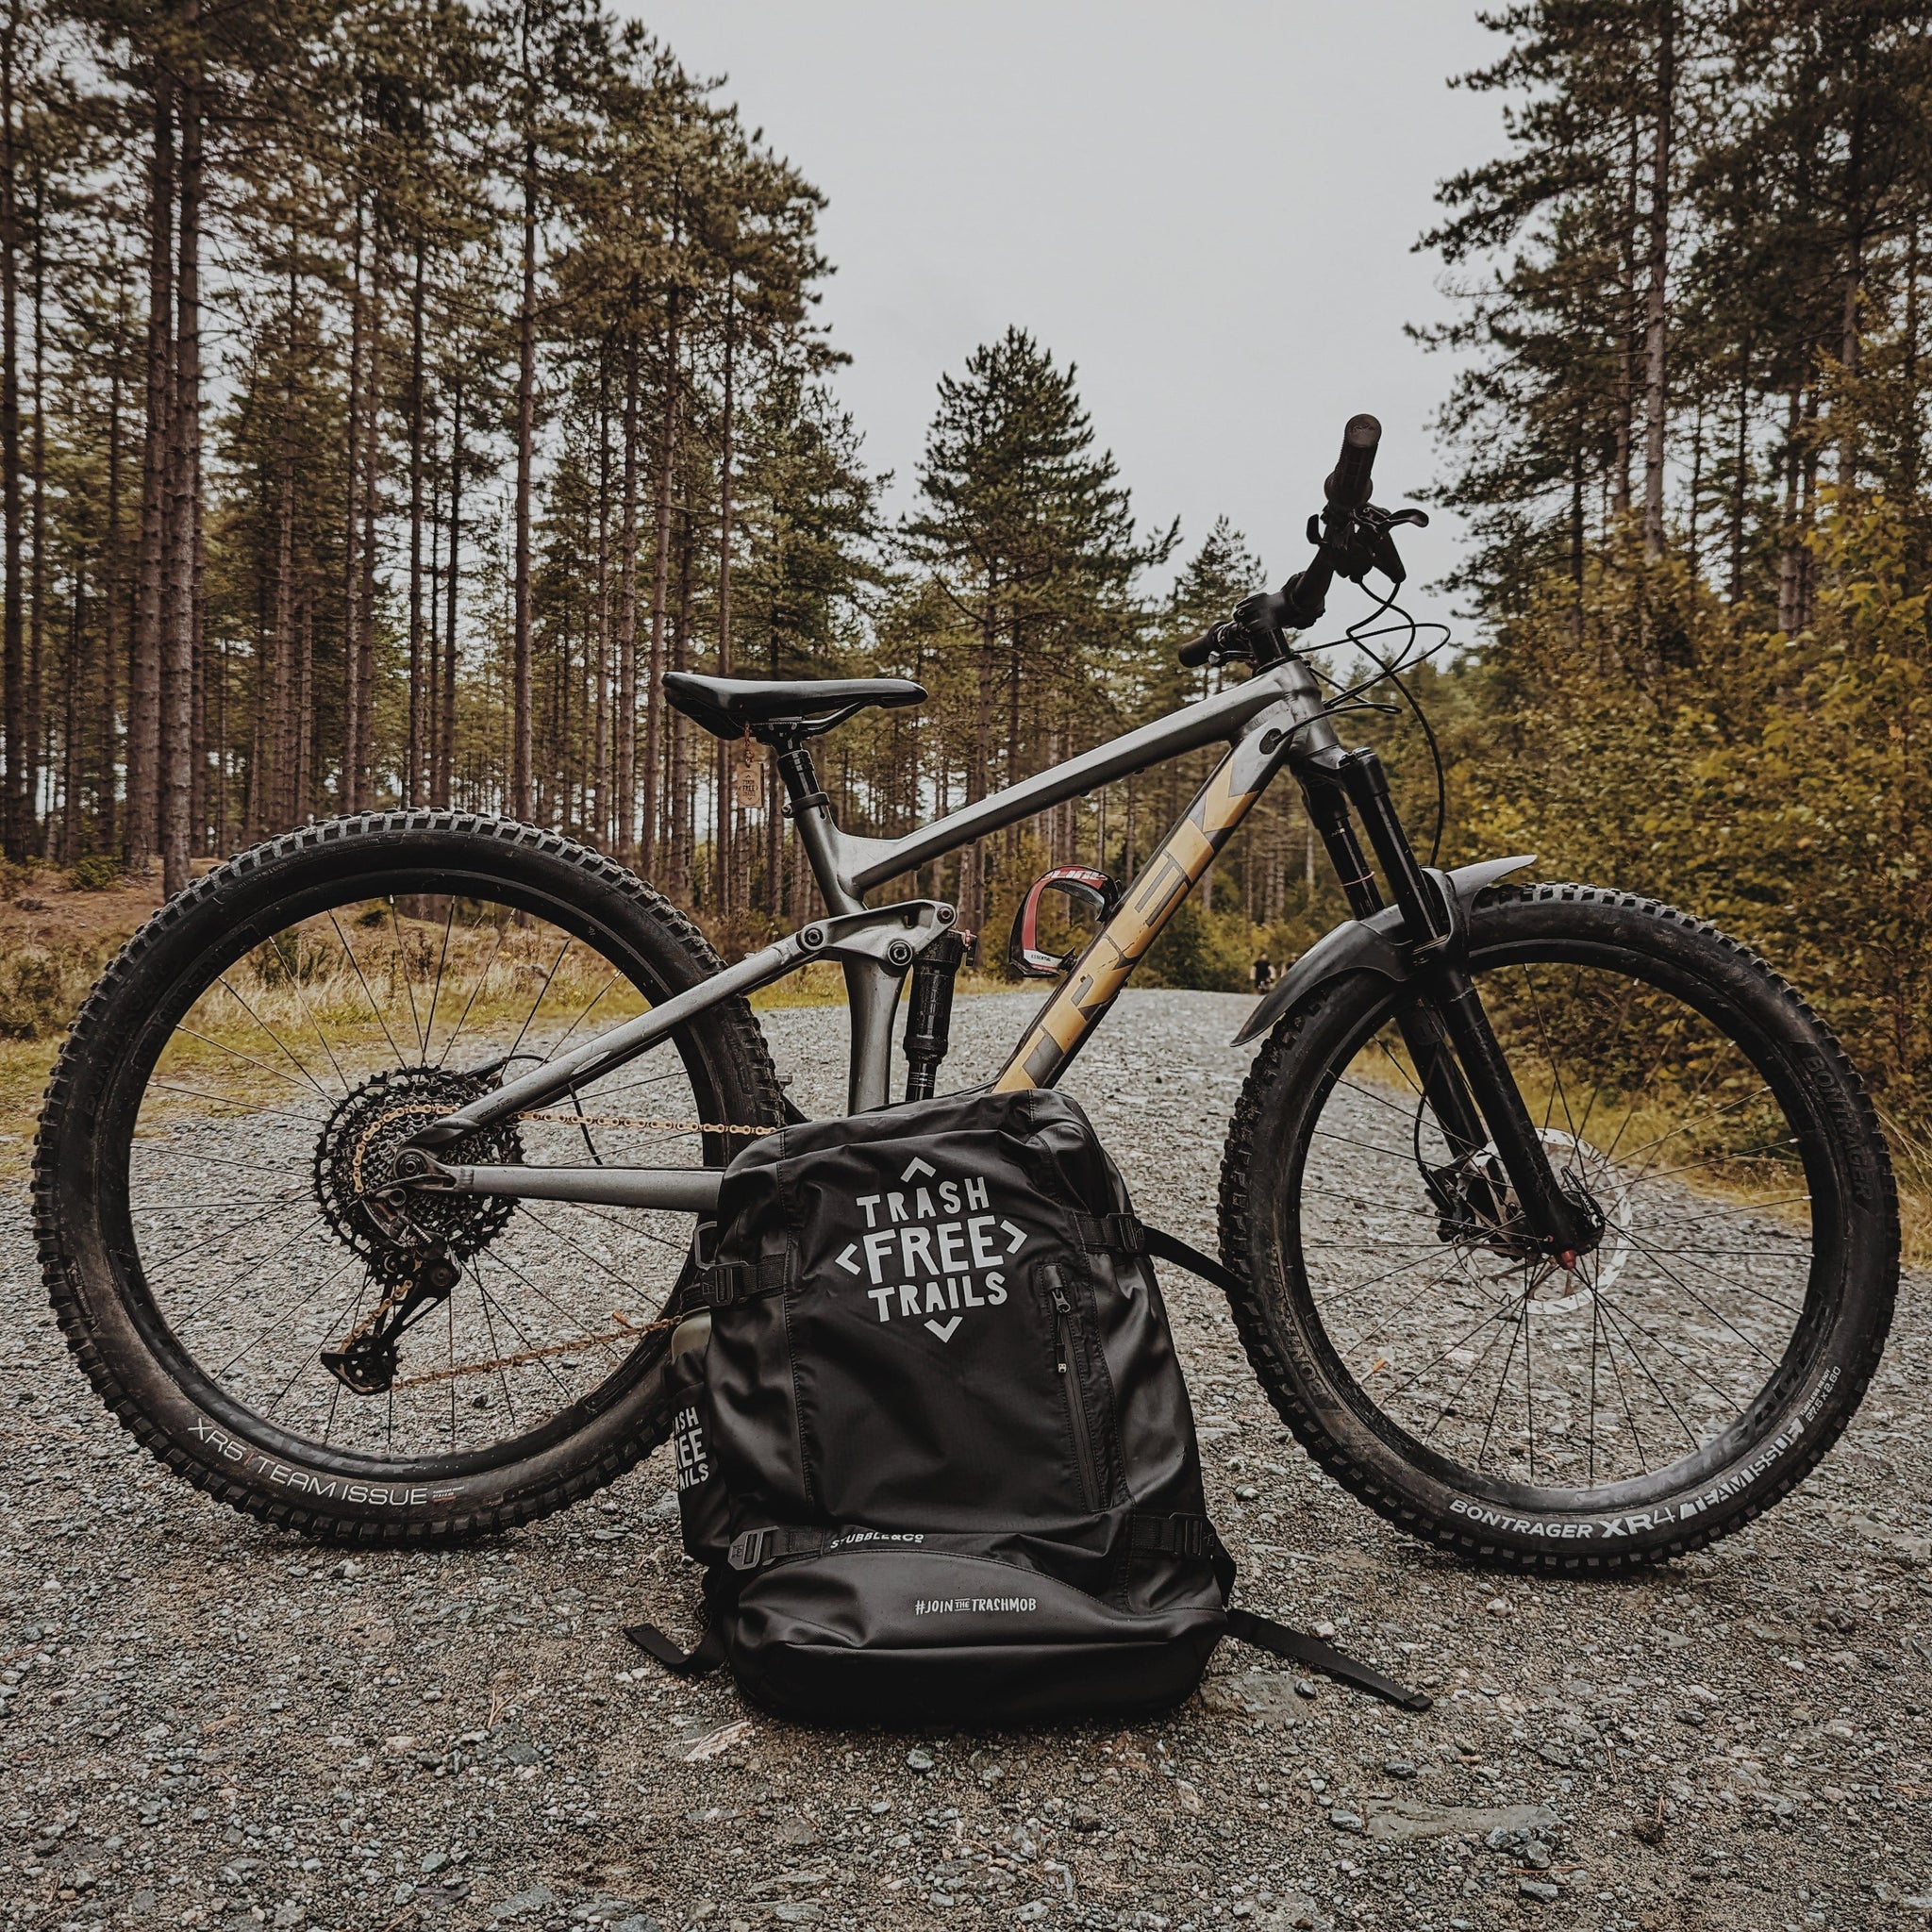 Mountain bike on trail with backpack in front